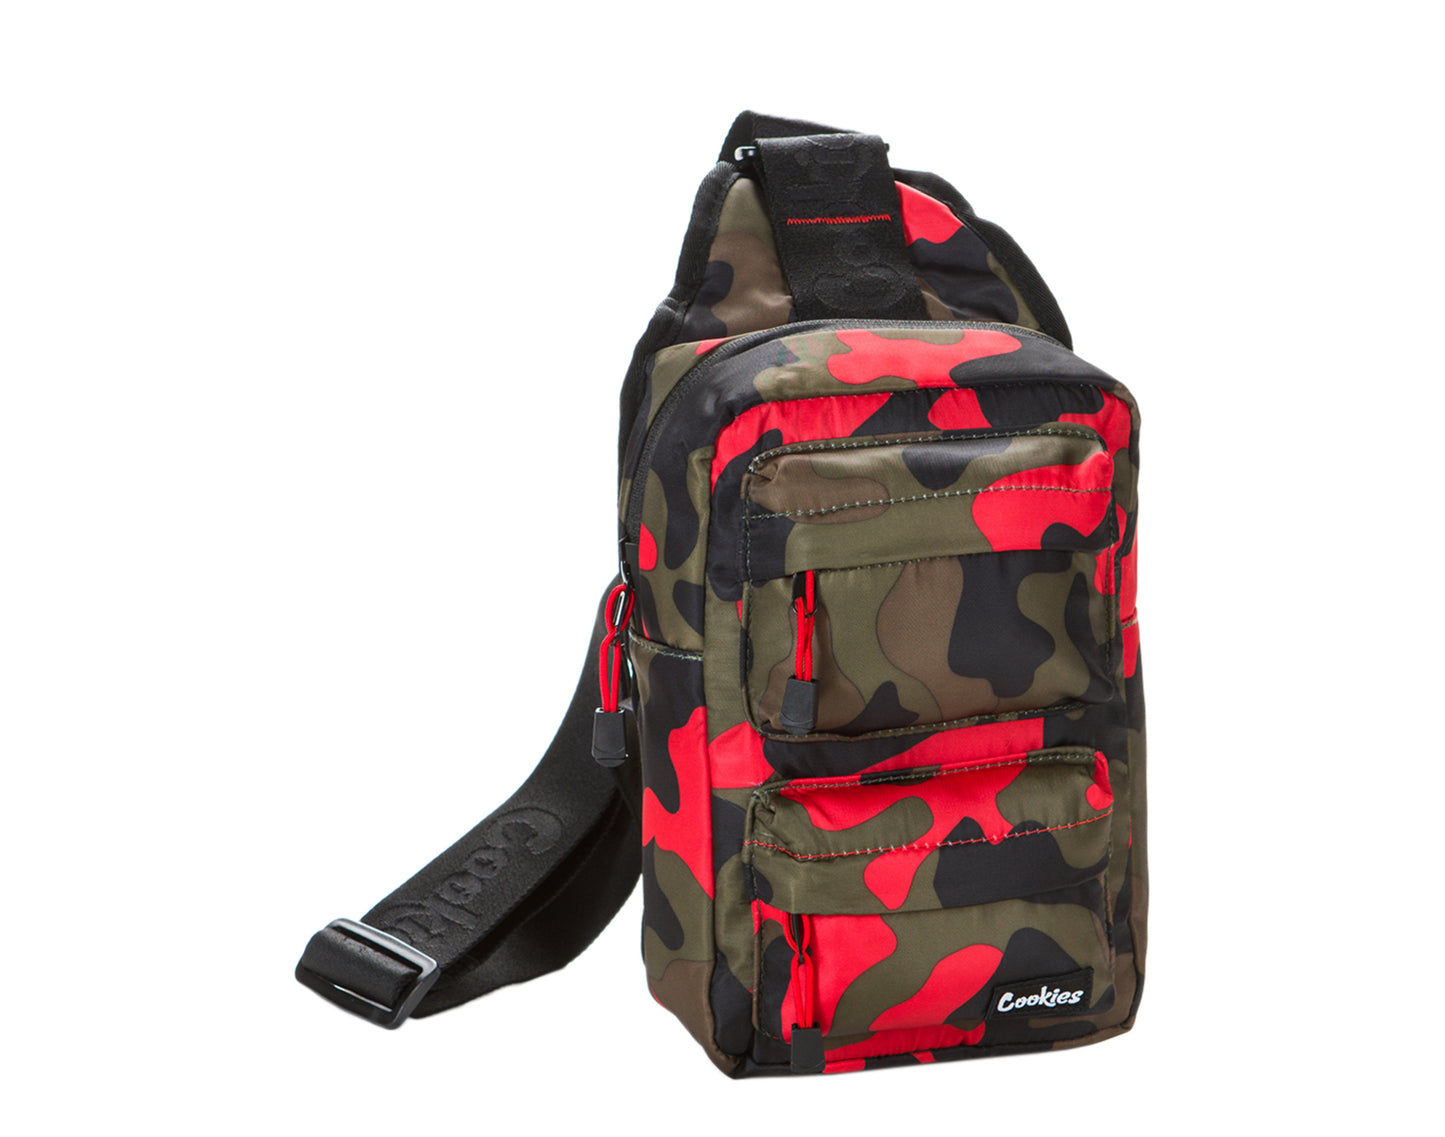 Cookies Rack Pack Over-The-Shoulder Red Camo Sling Bag 1546A4399-RDC